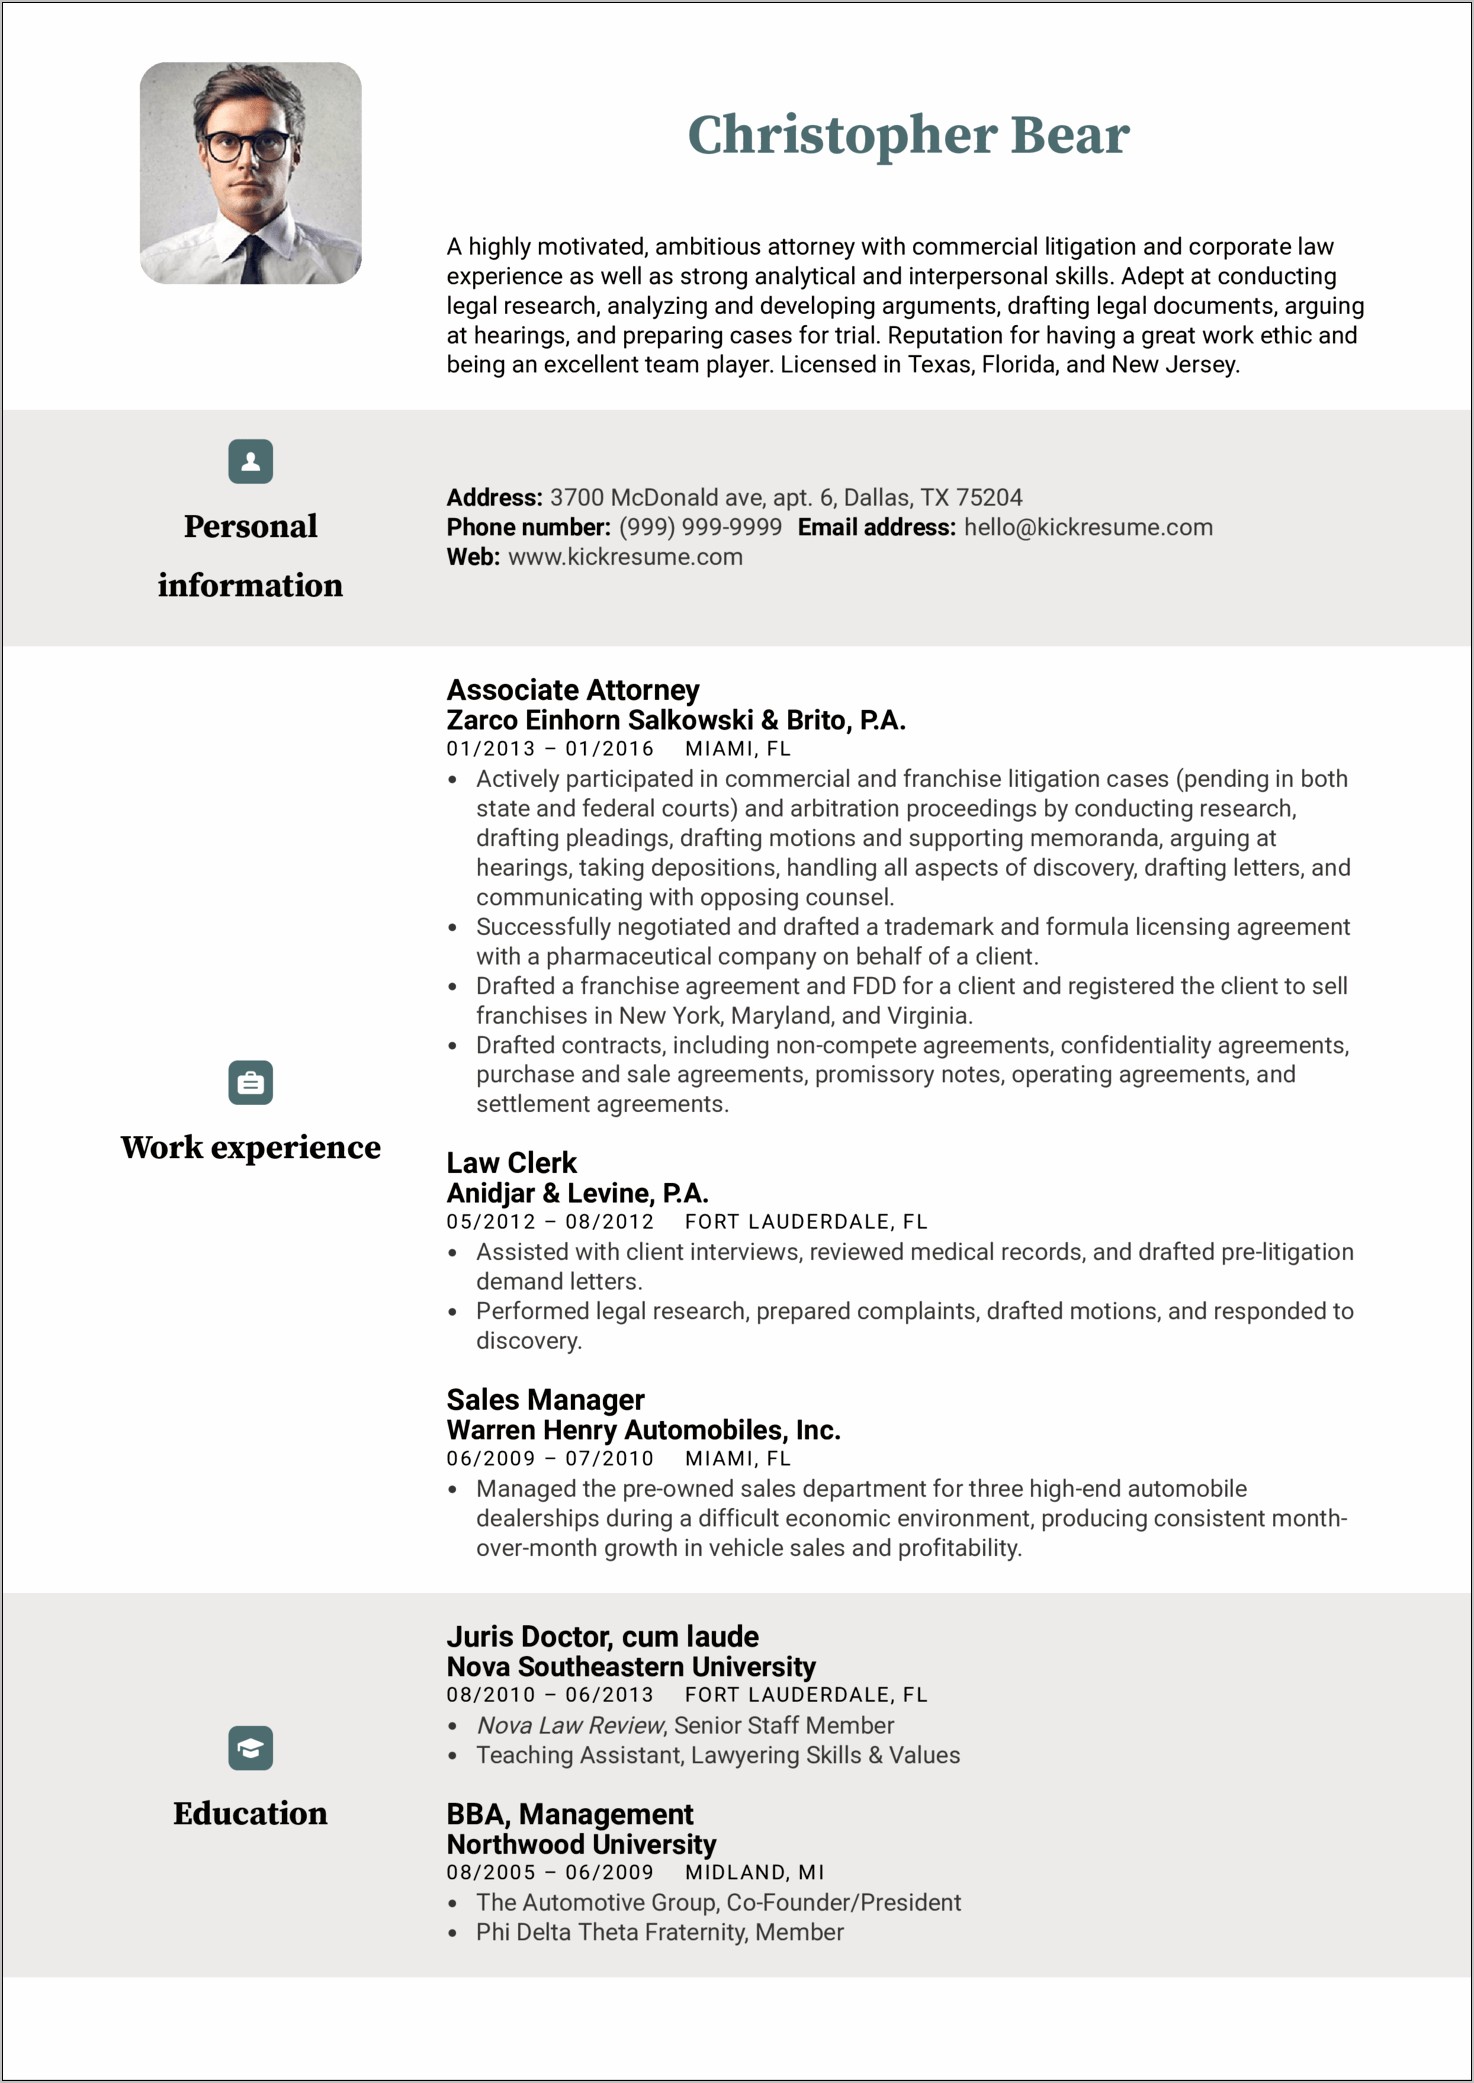 Document Review Attorney Sample Resume